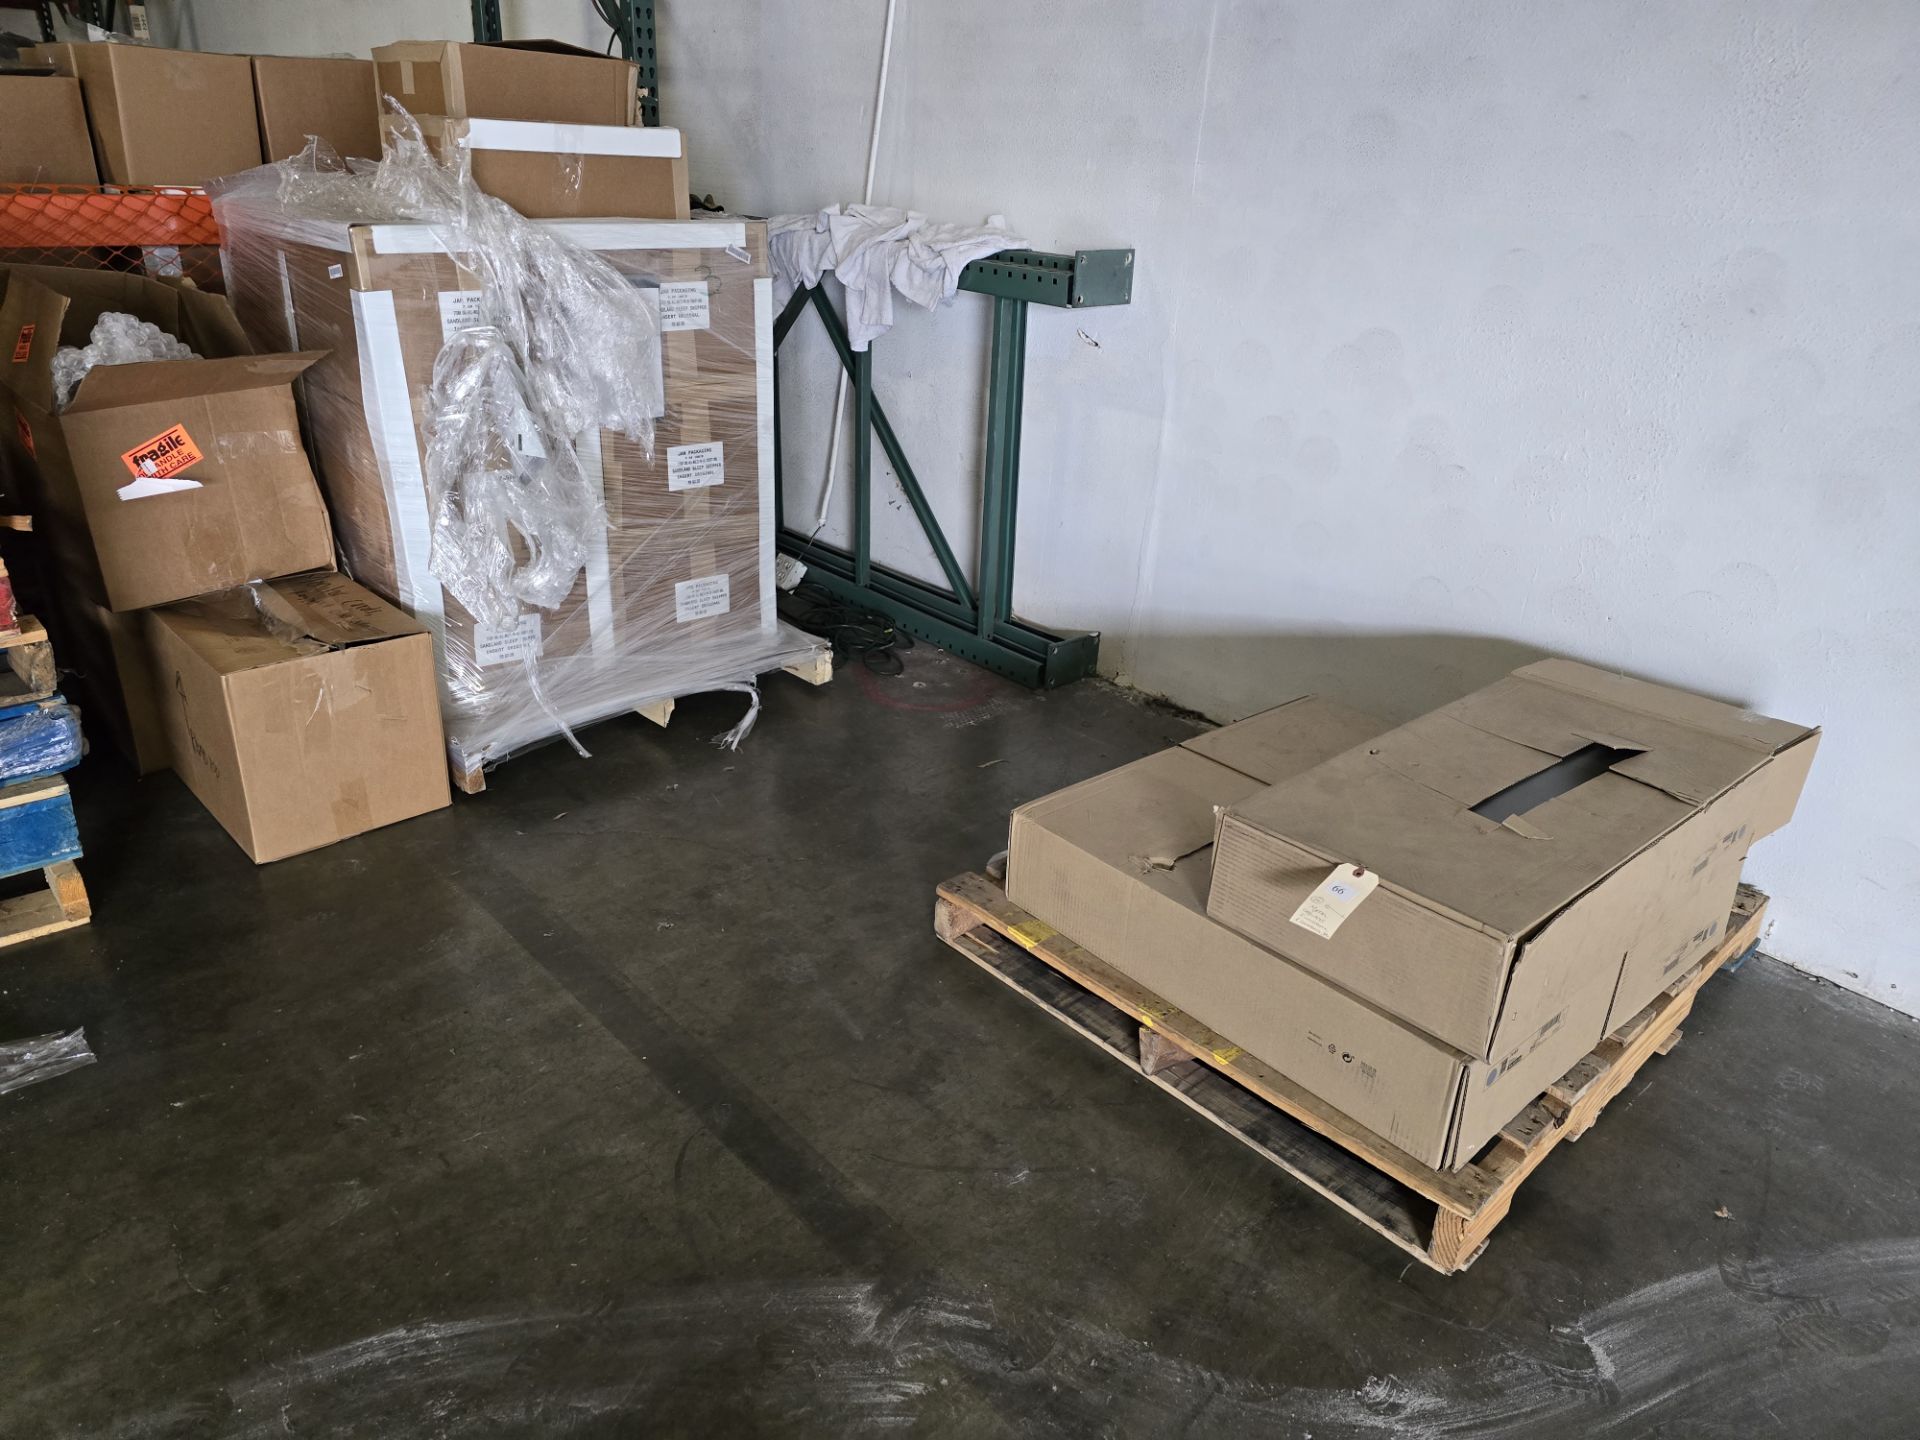 METAL CABINETS, ELECTRONICS & PACKAGING - 3 PALLET